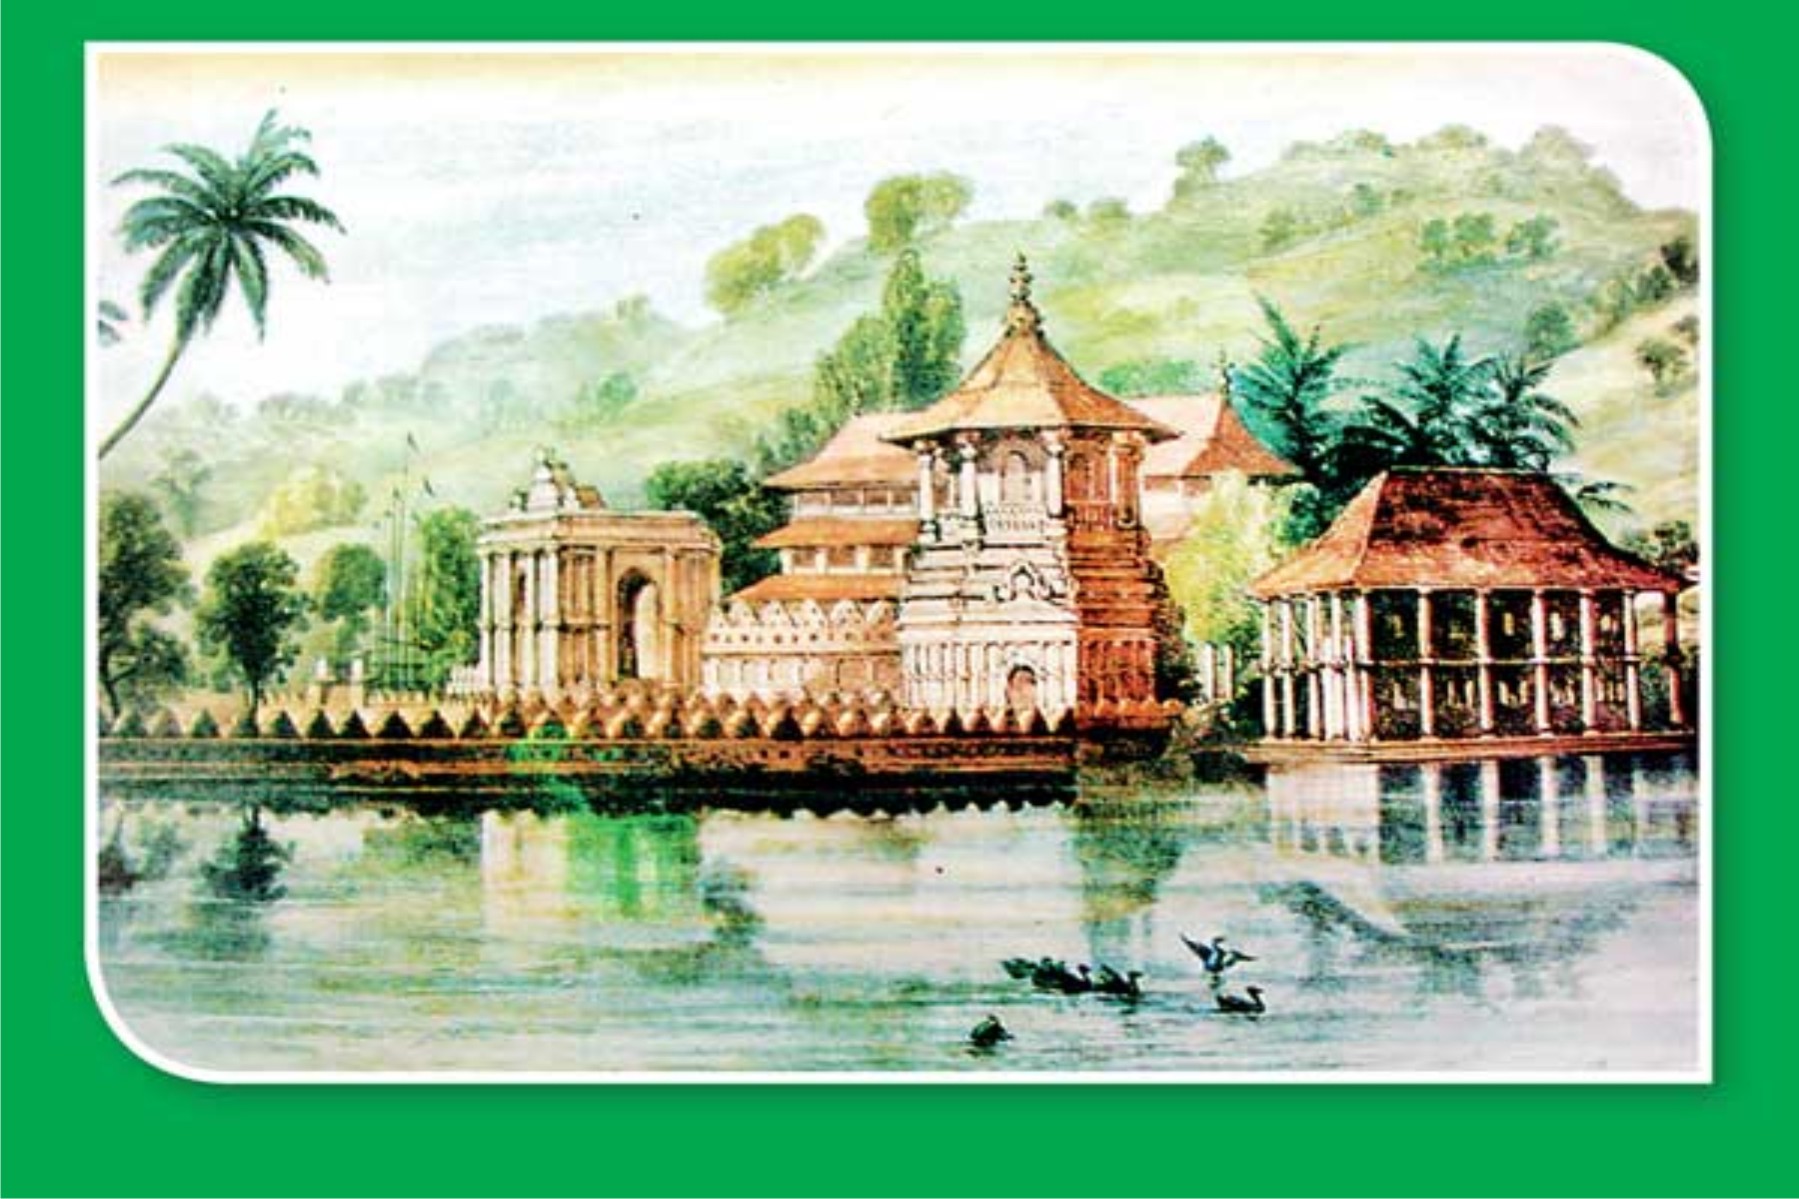 Kandy and the month of April